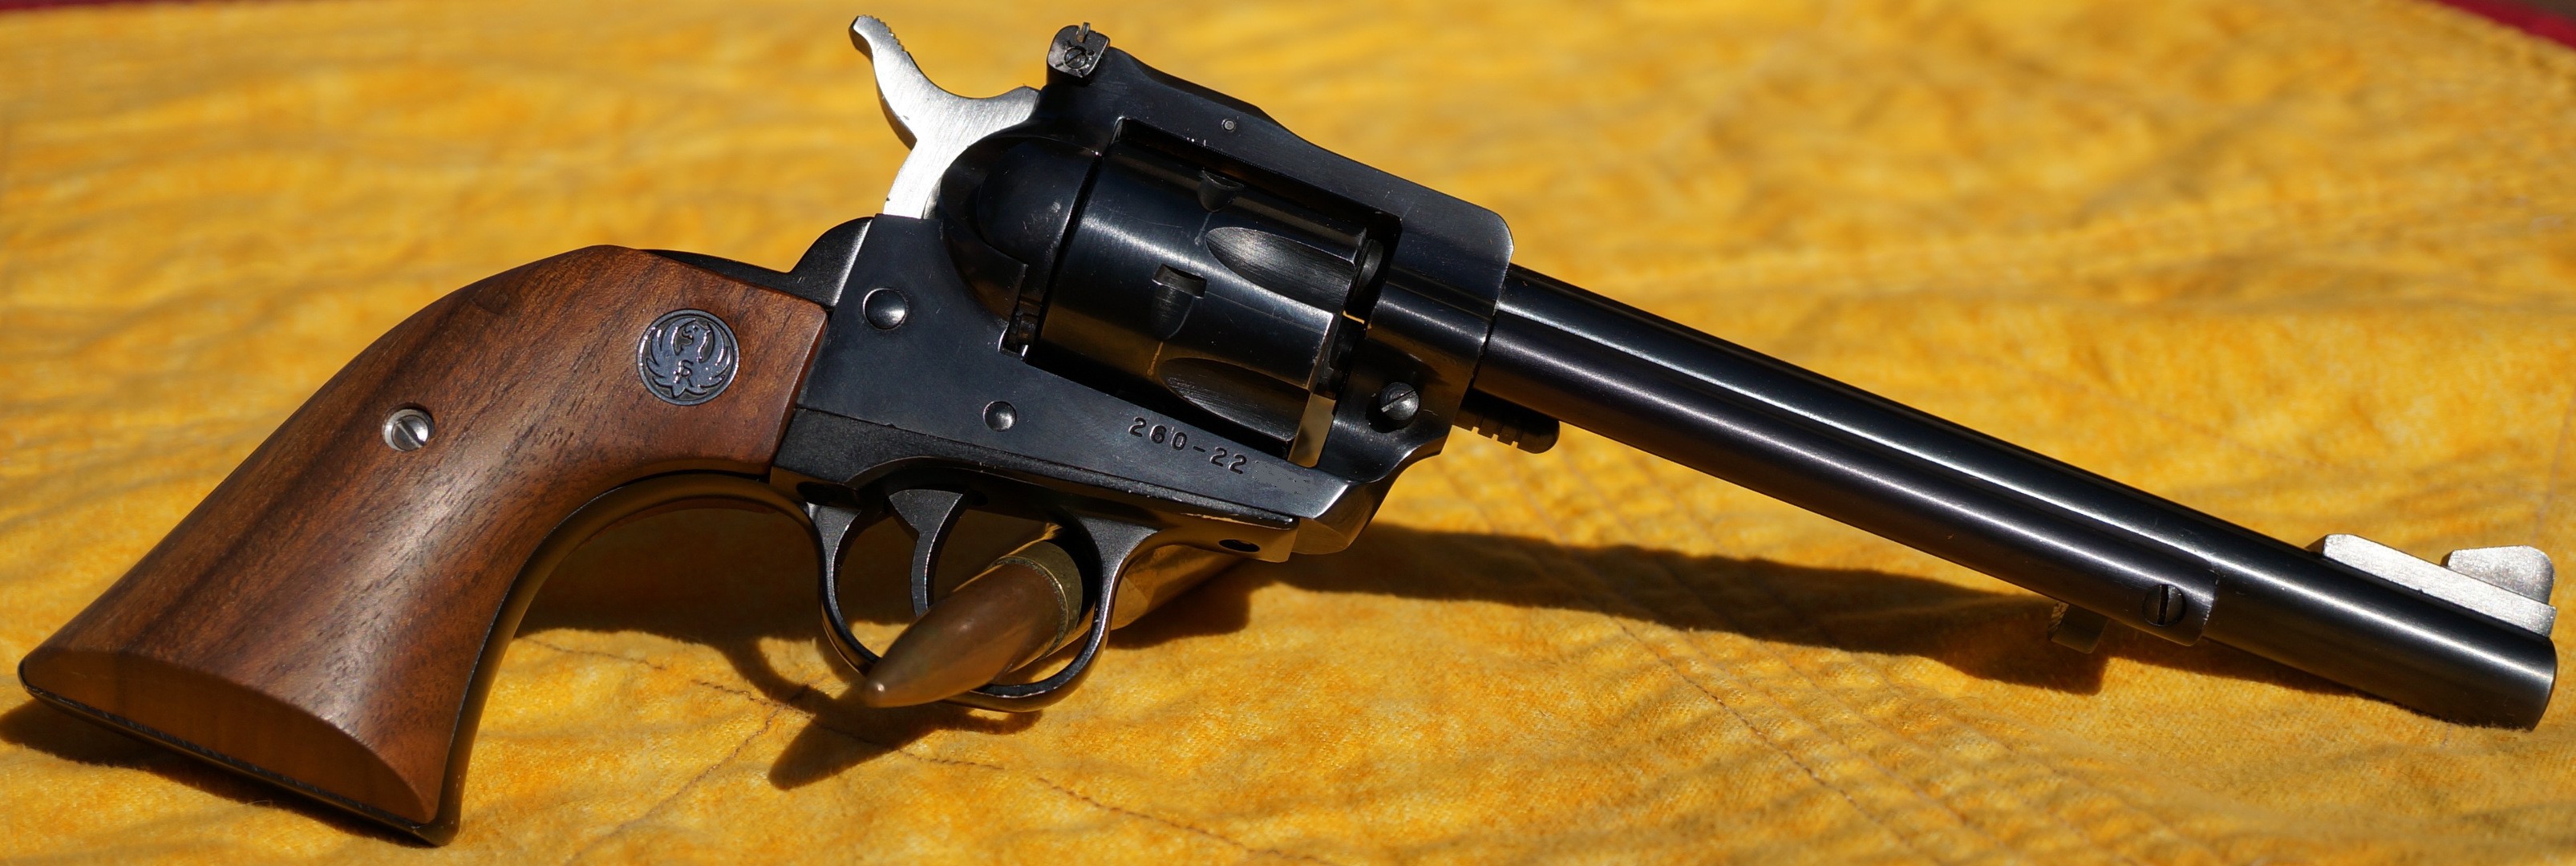 General 3212x1080 gun pistol revolver Ruger Sporting pistol Target pistol weapon awesome face American firearms